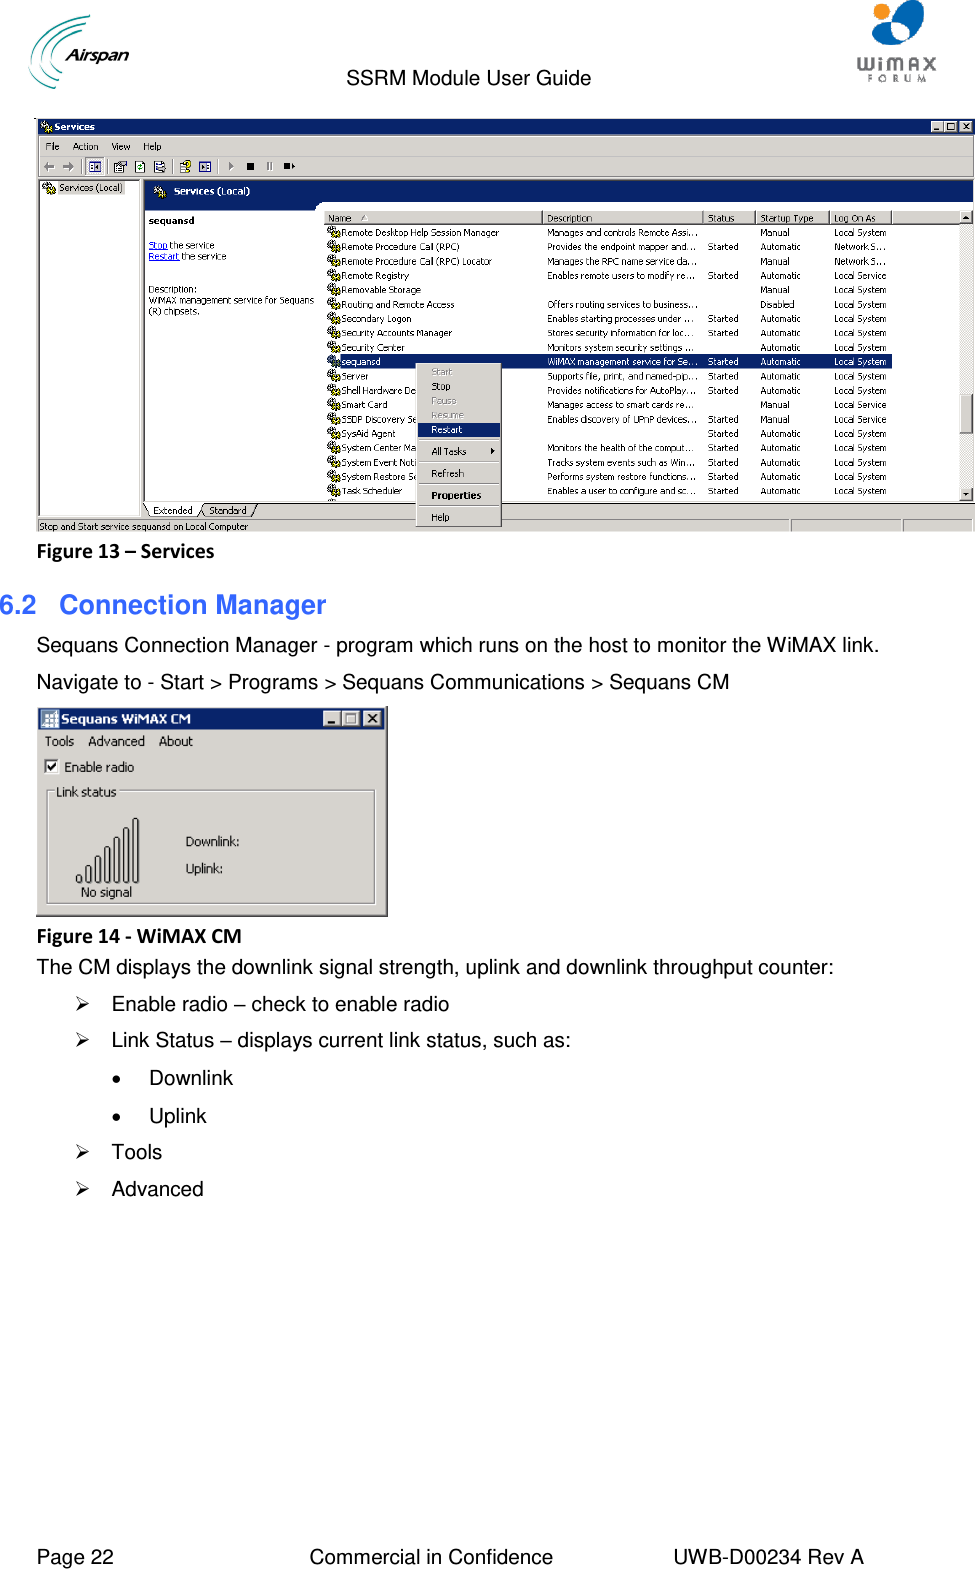                                  SSRM Module User Guide     Page 22  Commercial in Confidence  UWB-D00234 Rev A     Figure 13 – Services 6.2 Connection Manager Sequans Connection Manager - program which runs on the host to monitor the WiMAX link. Navigate to - Start &gt; Programs &gt; Sequans Communications &gt; Sequans CM  Figure 14 - WiMAX CM The CM displays the downlink signal strength, uplink and downlink throughput counter:   Enable radio – check to enable radio   Link Status – displays current link status, such as:   Downlink   Uplink   Tools   Advanced   